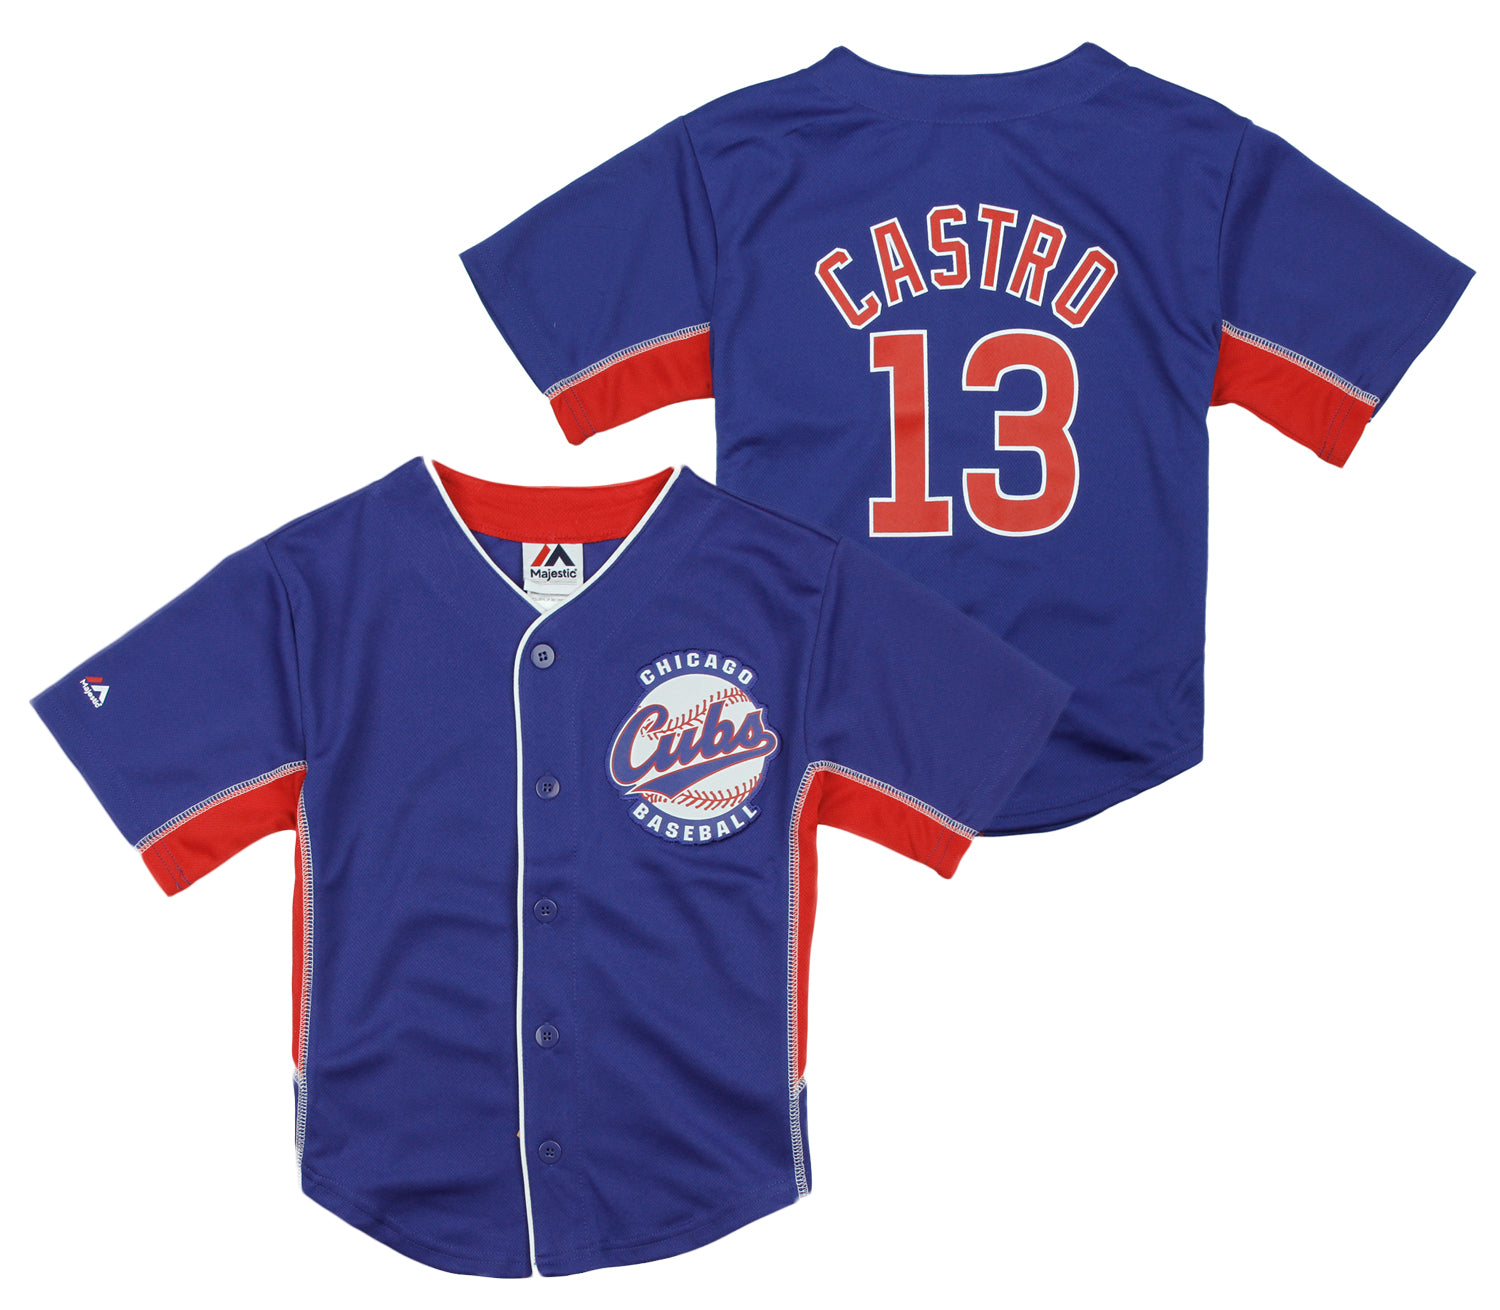 Majestic MLB Toddler Chicago Cubs Starlin Castro #13 Player Jersey - Blue - 2T